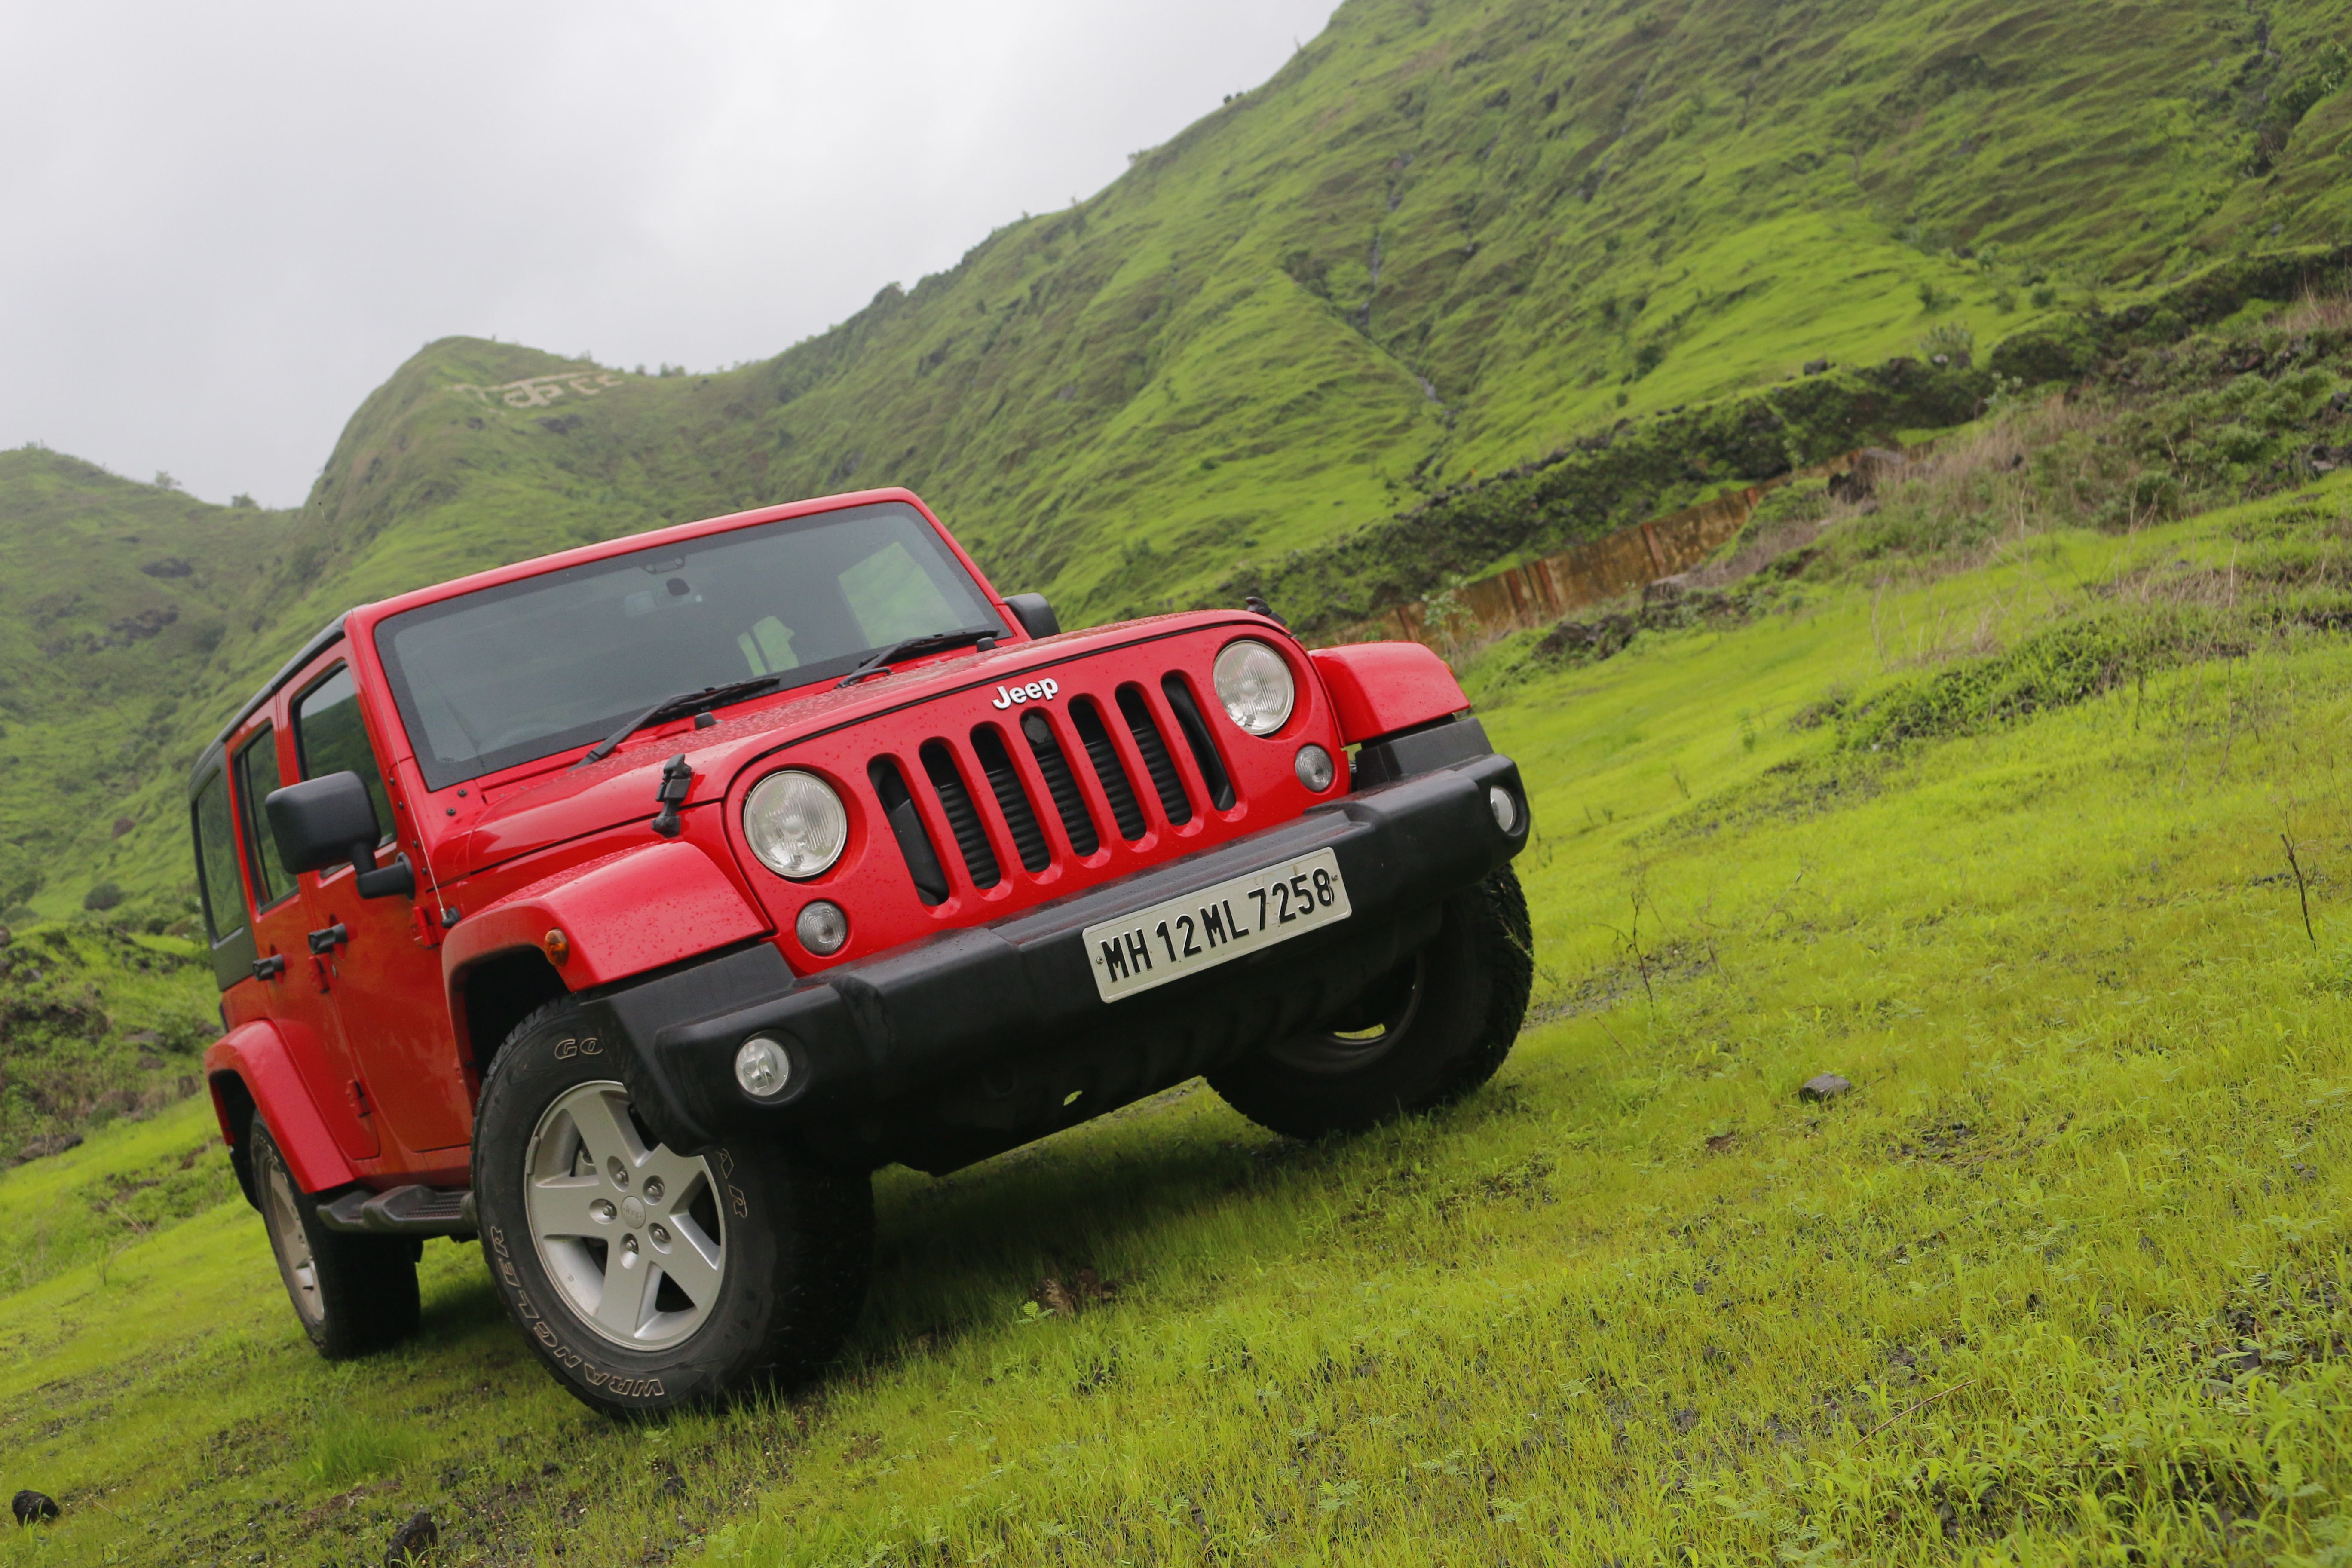 Jeep Wrangler Unlimited First Drive Review